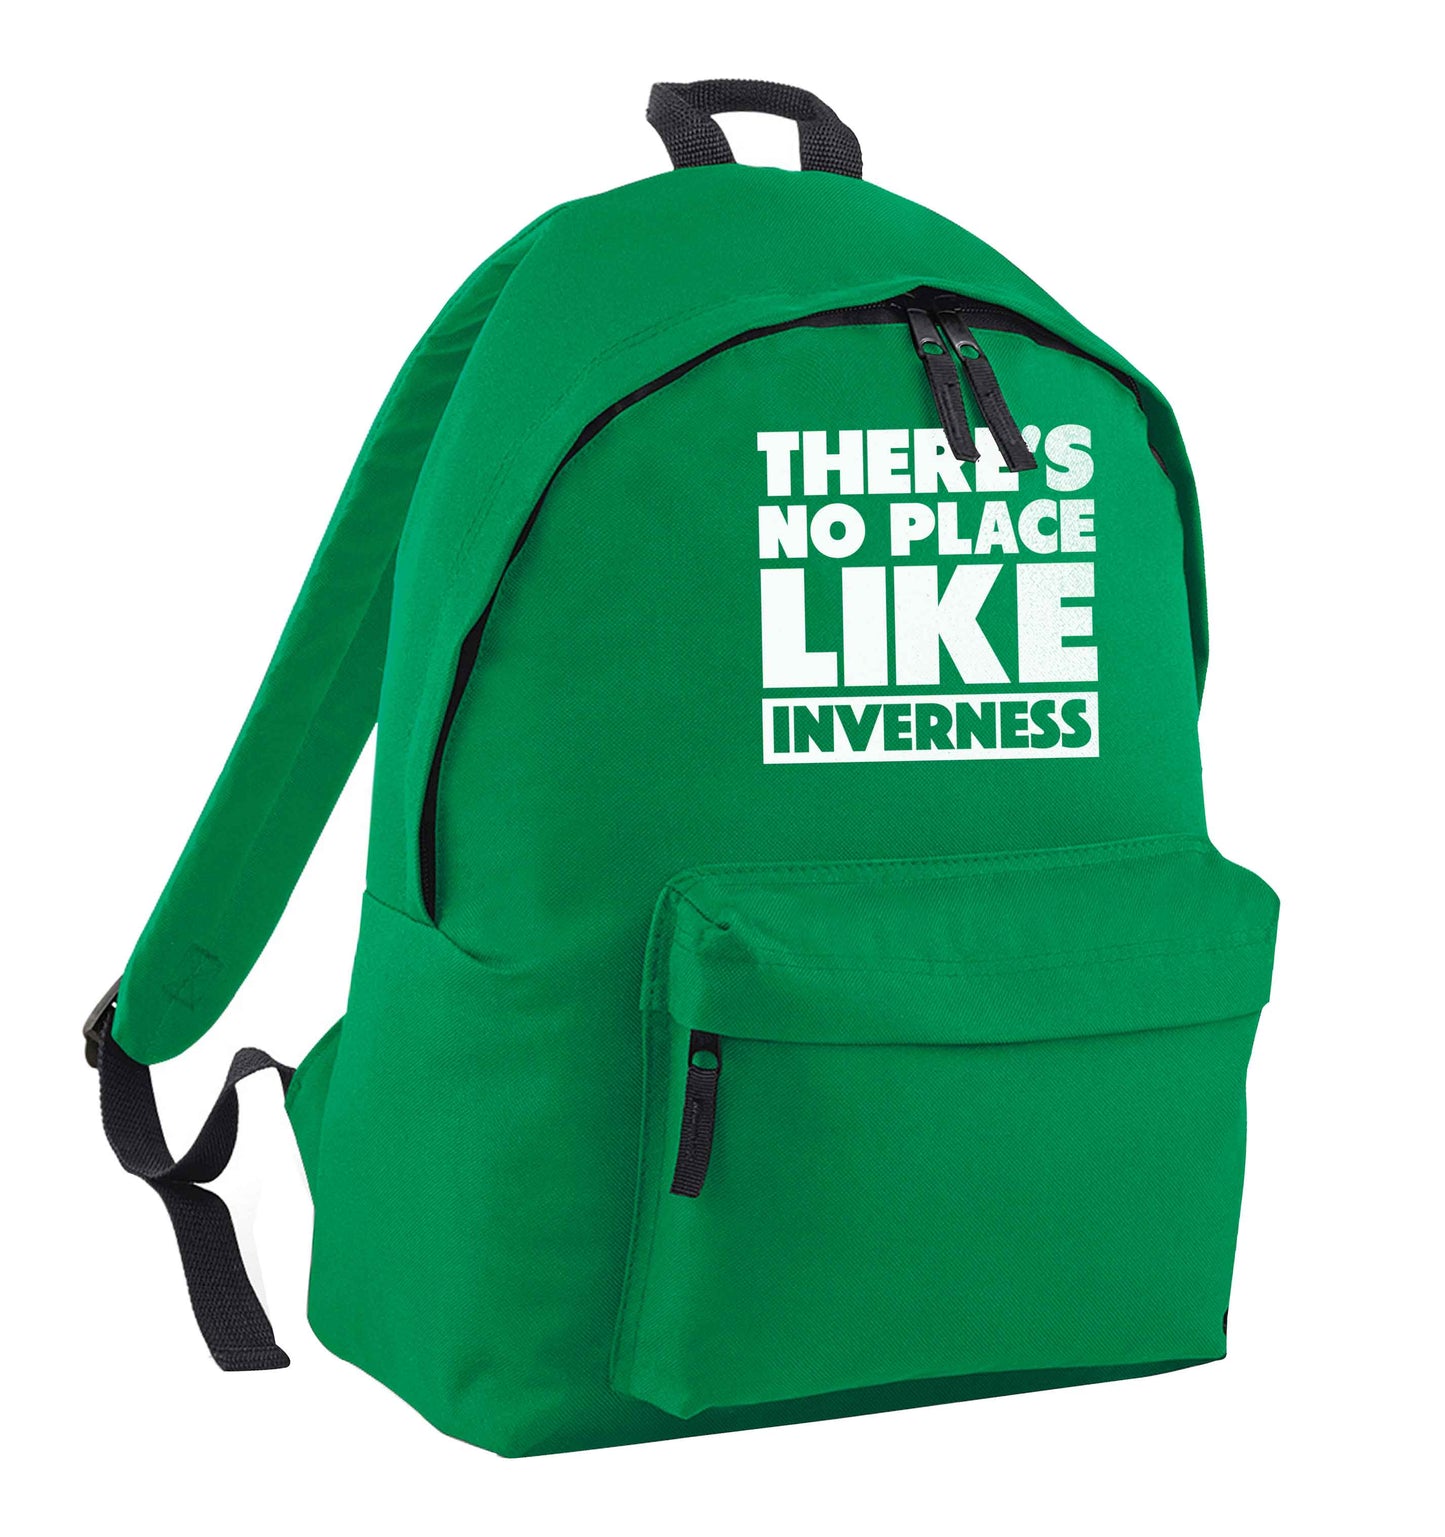 There's no place like Inverness green adults backpack